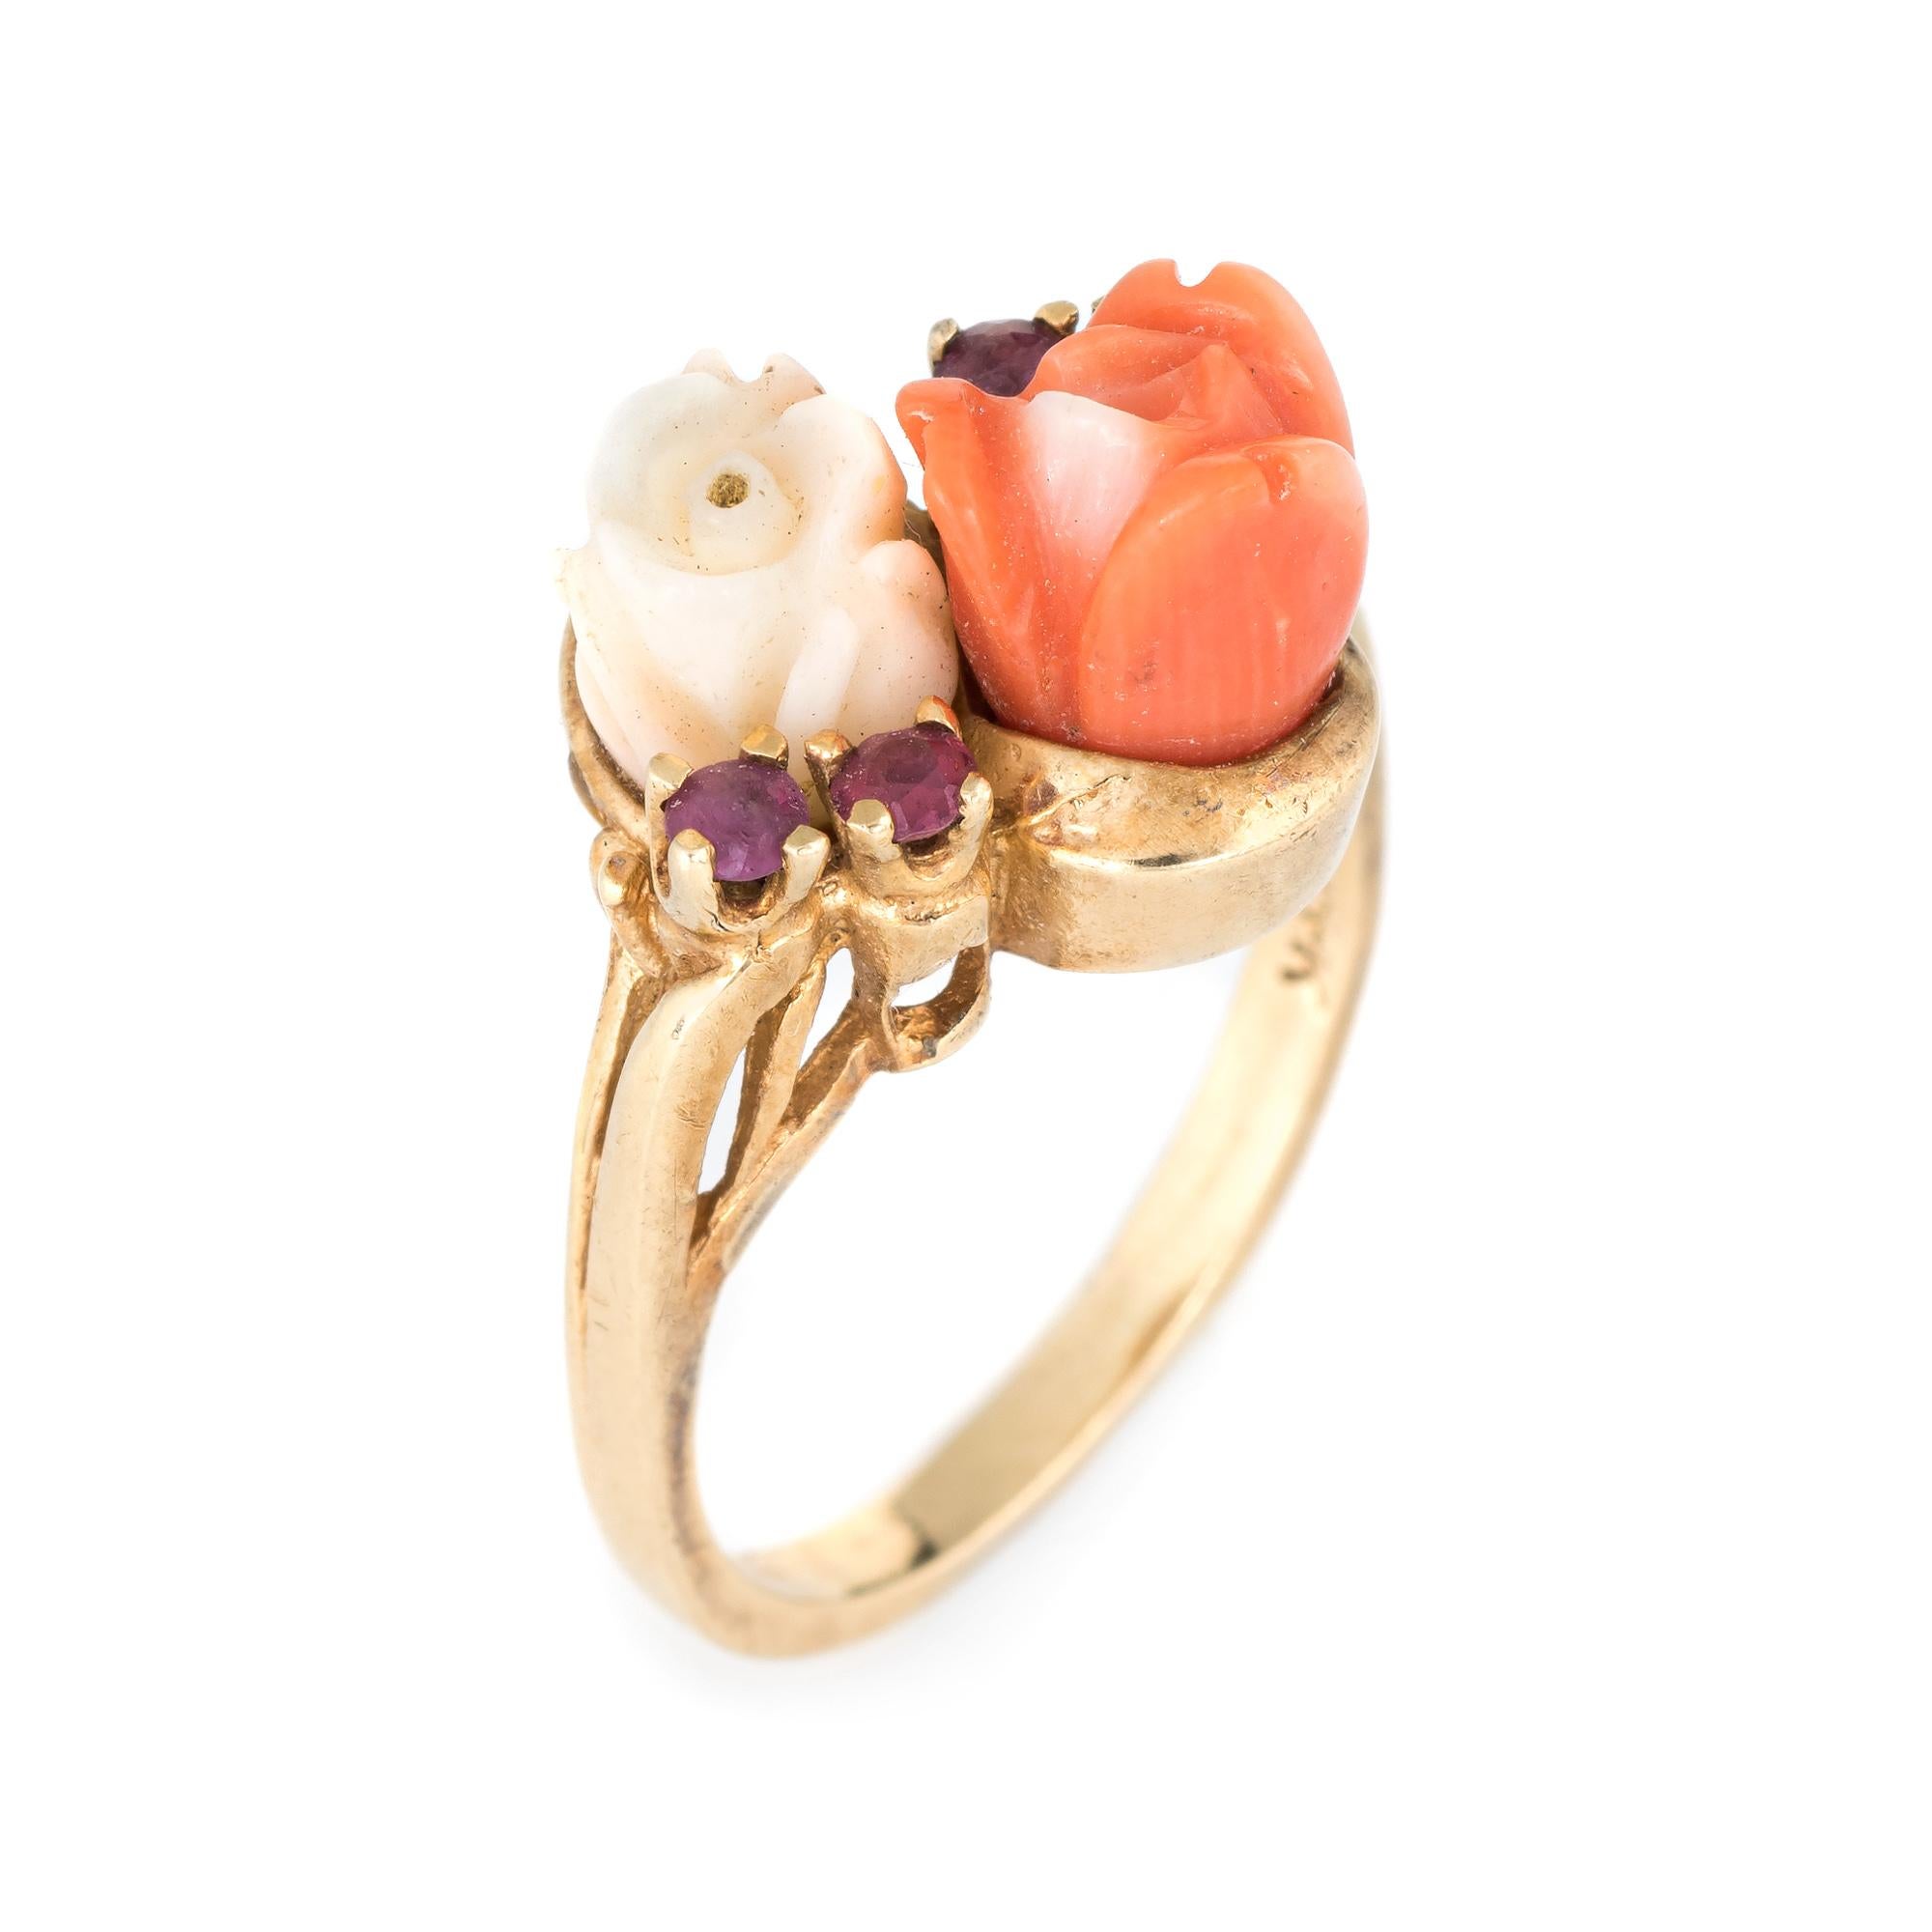 Stylish vintage double coral & ruby flower ring (circa 1960s to 1970s) crafted in 14 karat yellow gold. 

Two pieces of coral (white & apricot) measure 6mm & 7mm. Four rubies are each estimated at 0.02 carats (0.08 carats total estimated weight).